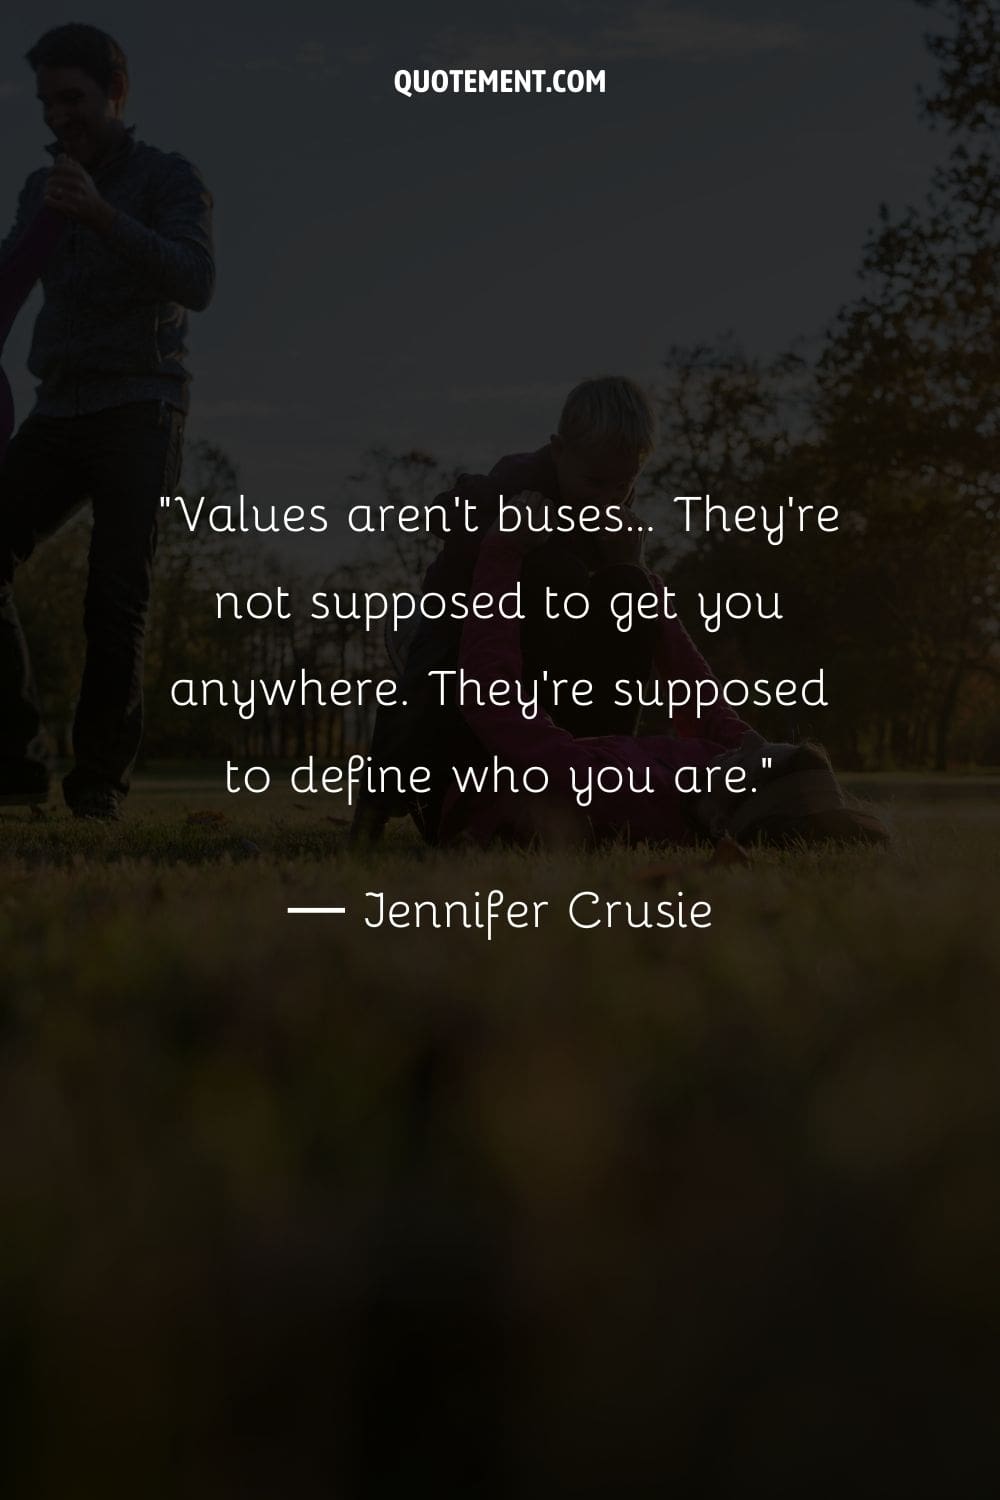 Values aren't buses... They're not supposed to get you anywhere. They're supposed to define who you are